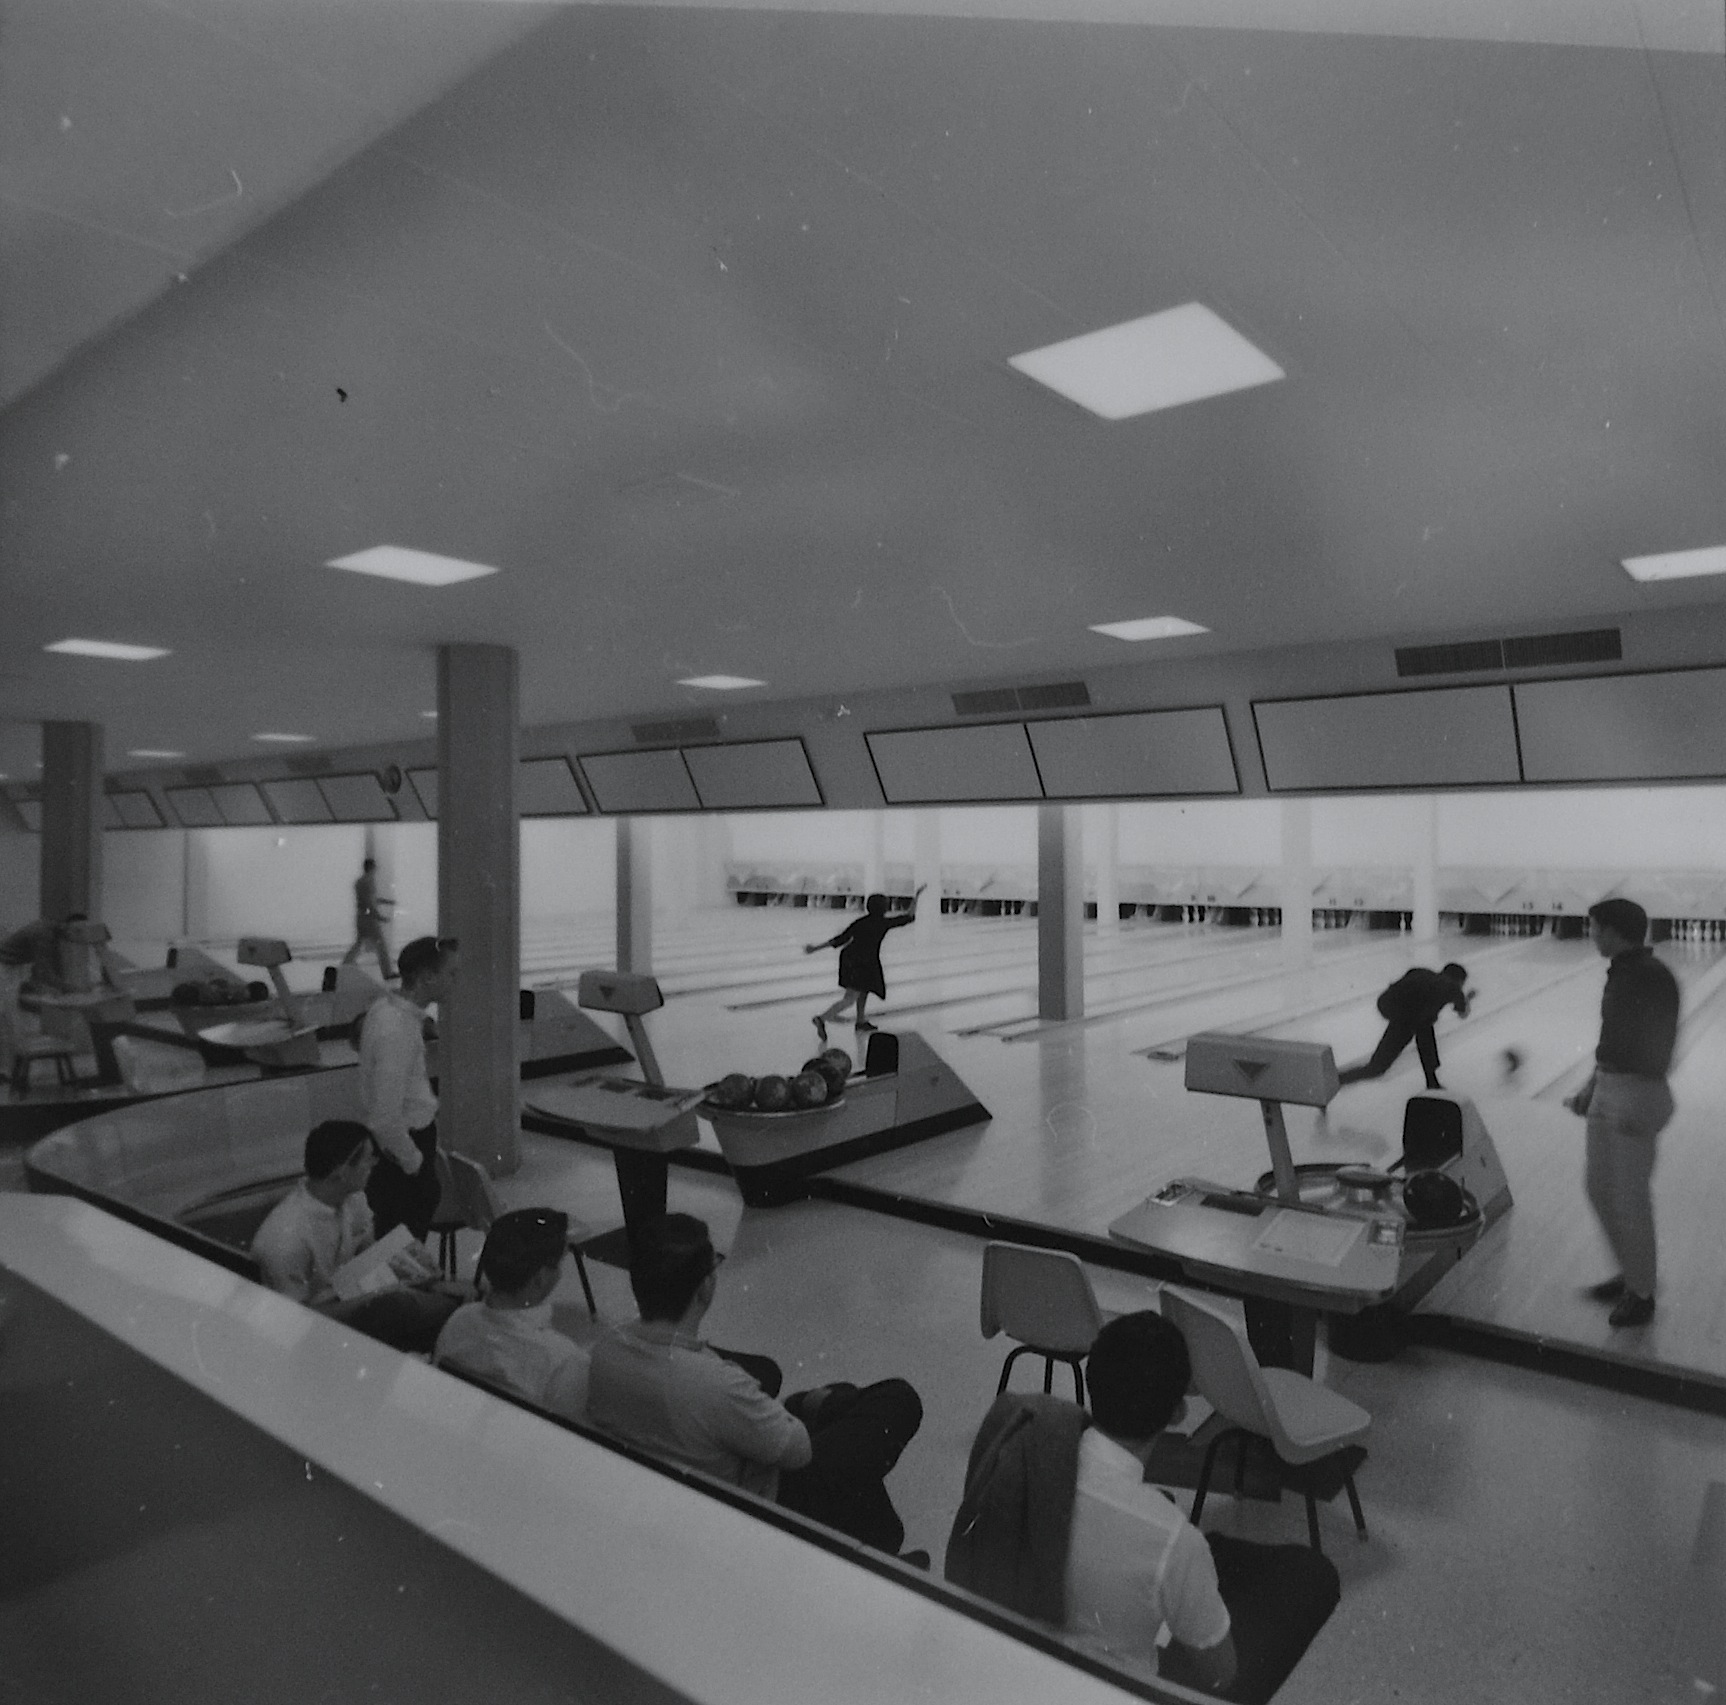 The old Bowling alley was once located on the first floor of the Student Union